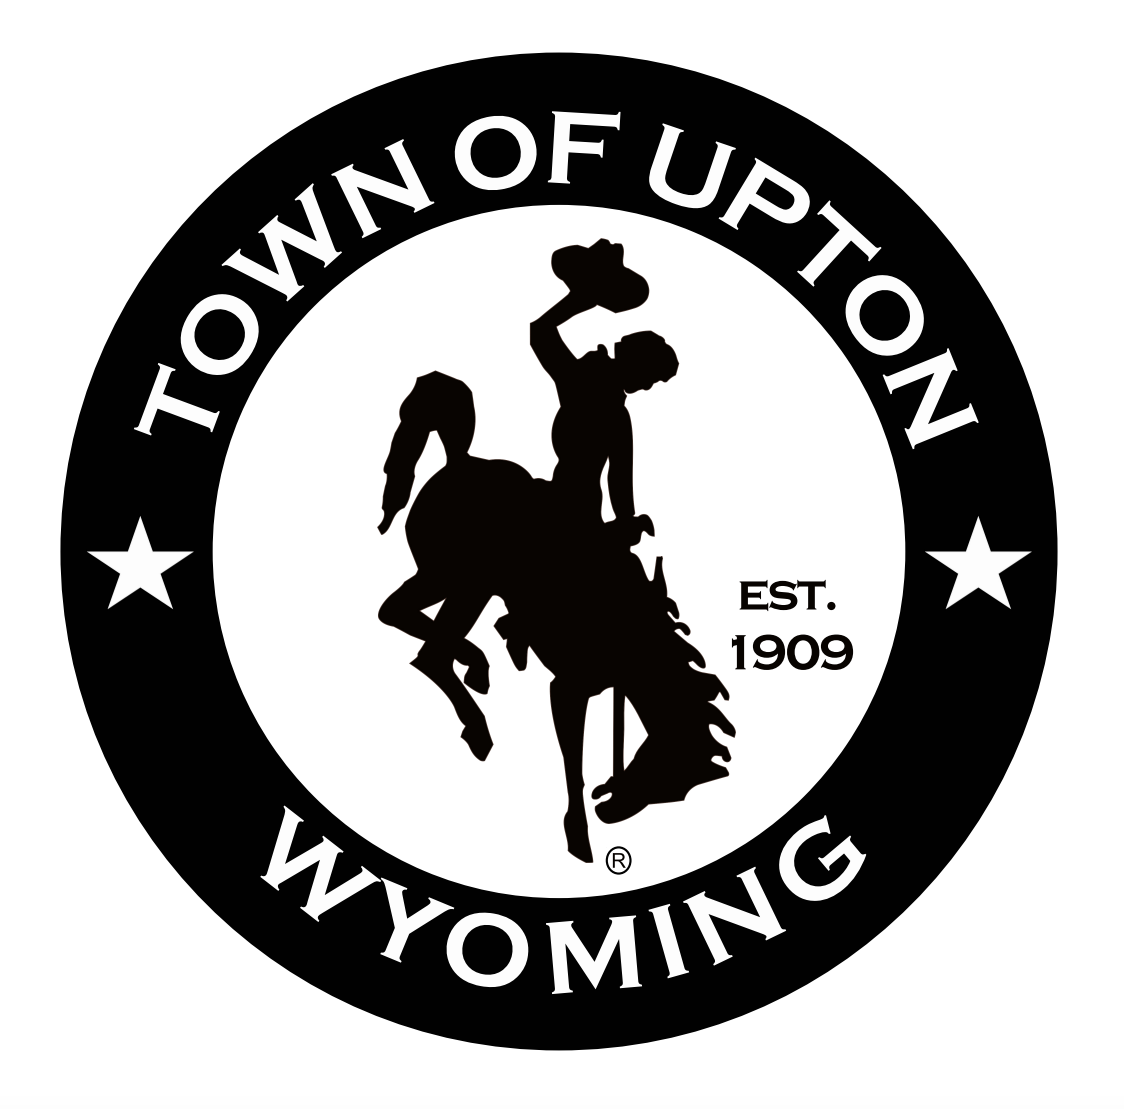 Town of Upton's Image